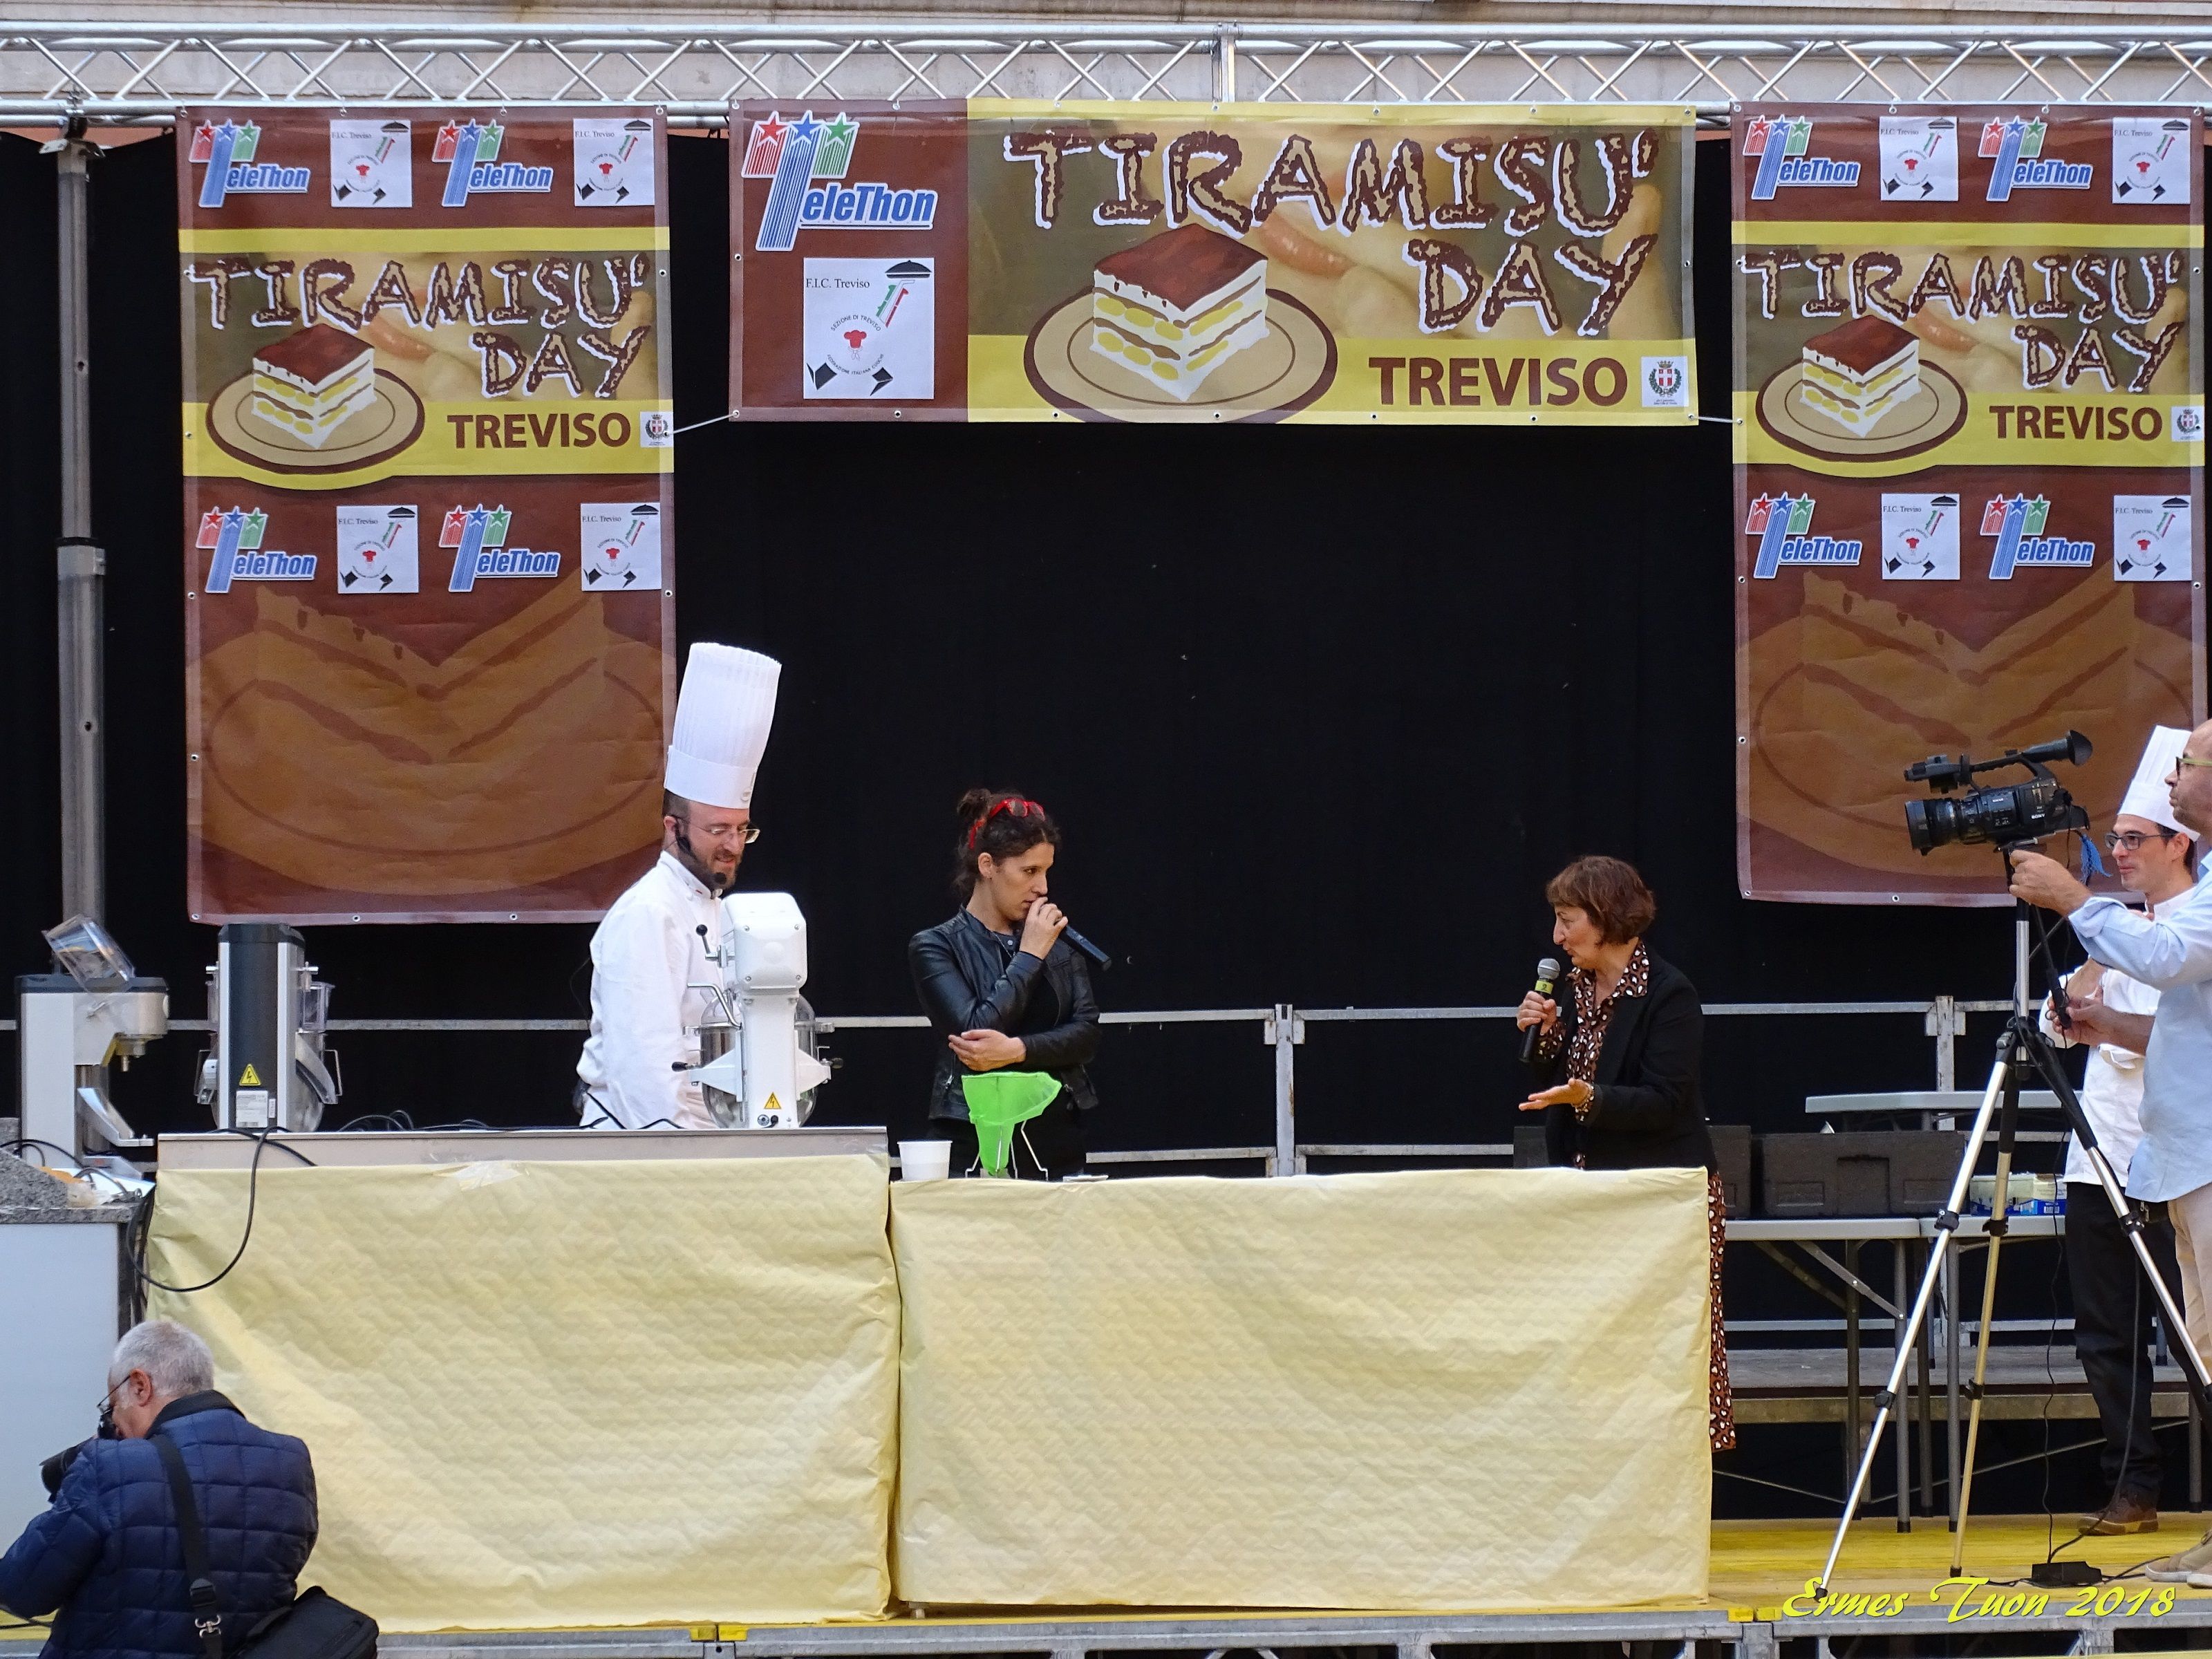 Caption: Show cooking at Treviso Tiramisù day